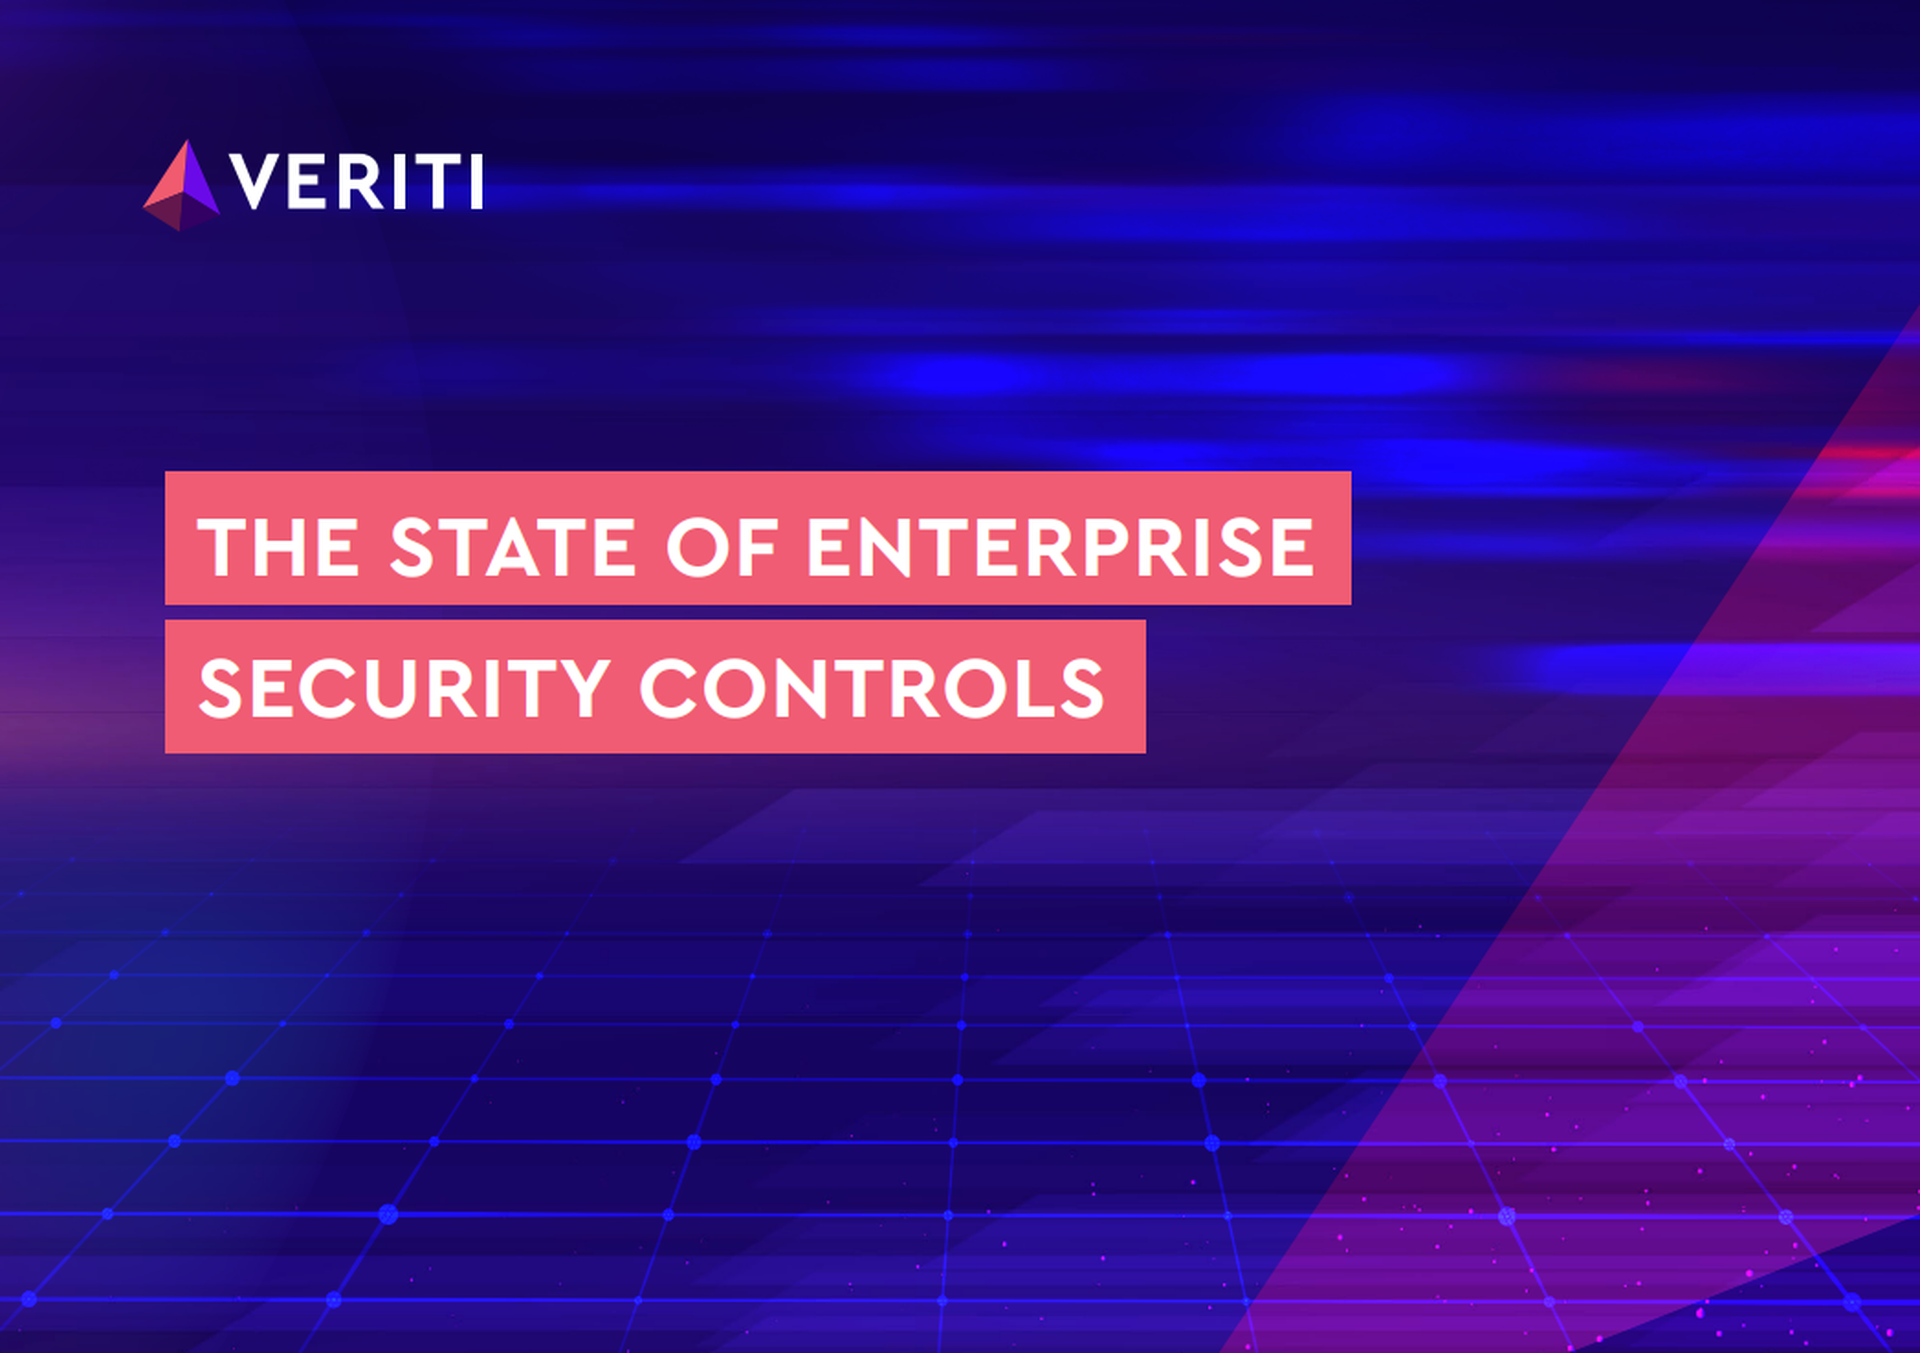 The State of Enterprise Security Controls